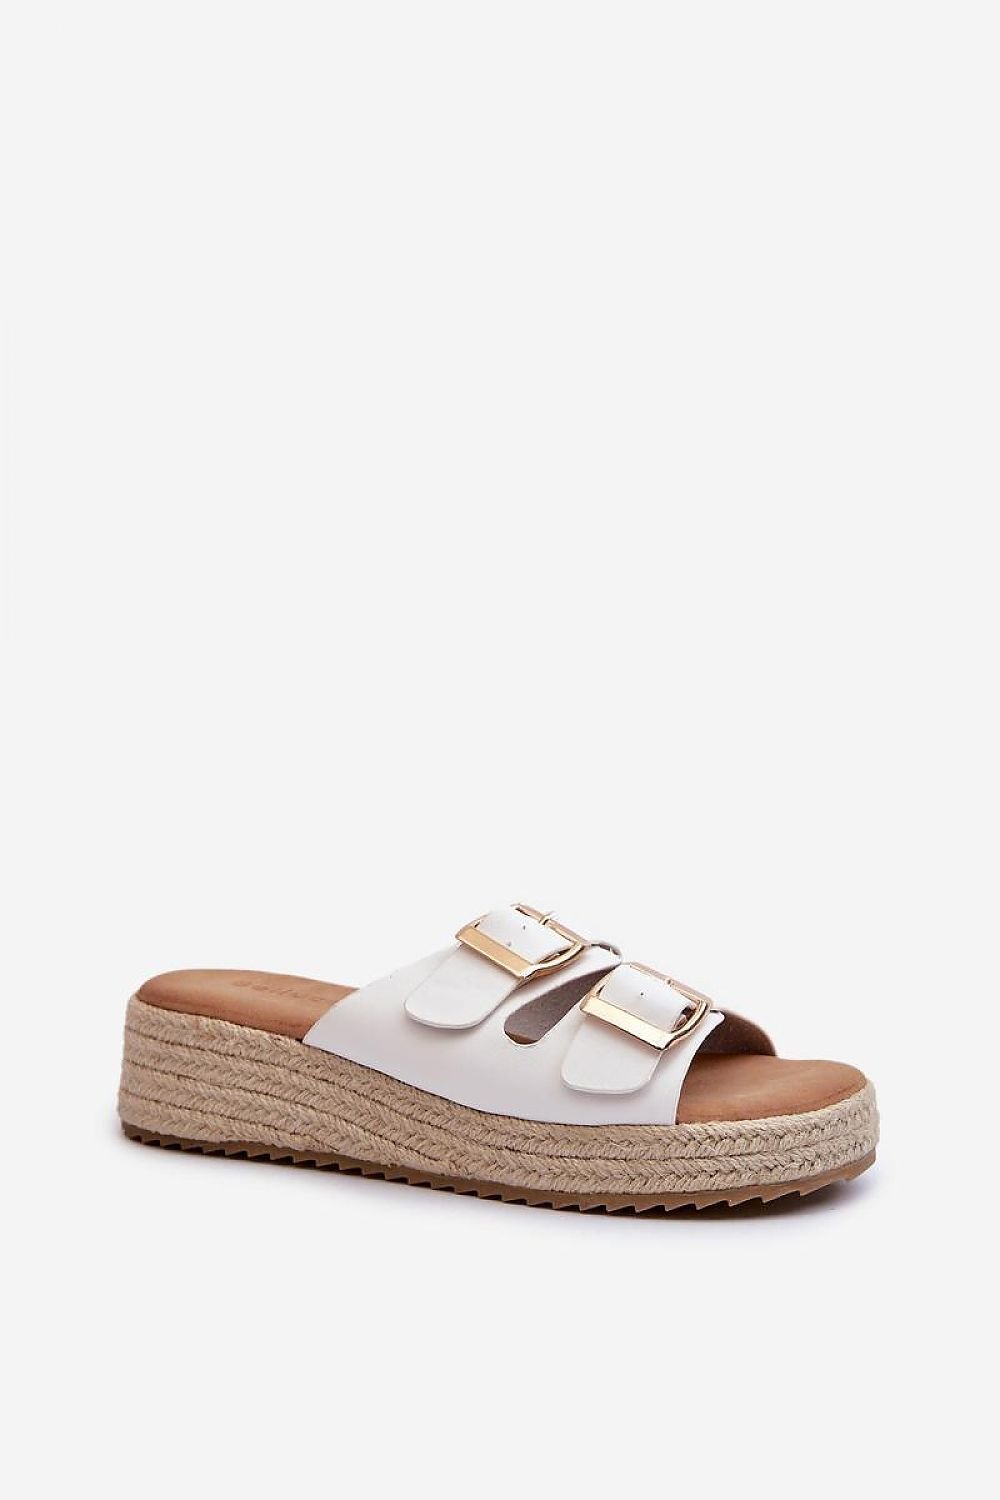 TEEK - Double Buckle Strap Straw Sole Sandals SHOES TEEK MH white 6.5 